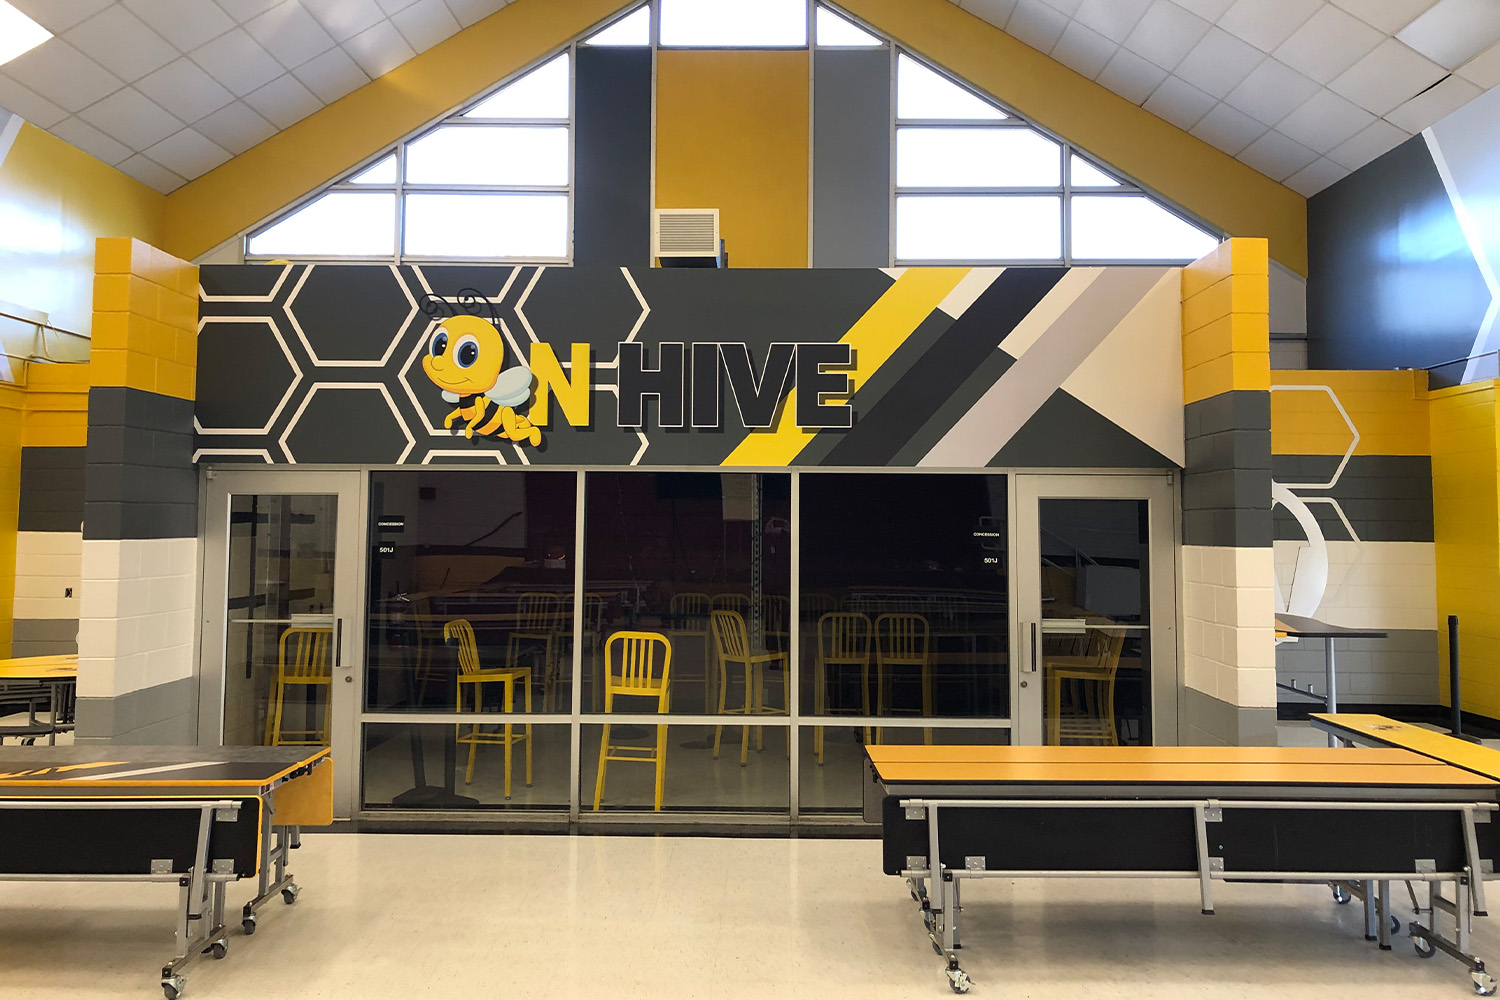 Northwestern Legends bumble bee mascot graphic on a call of the school's cafeteria